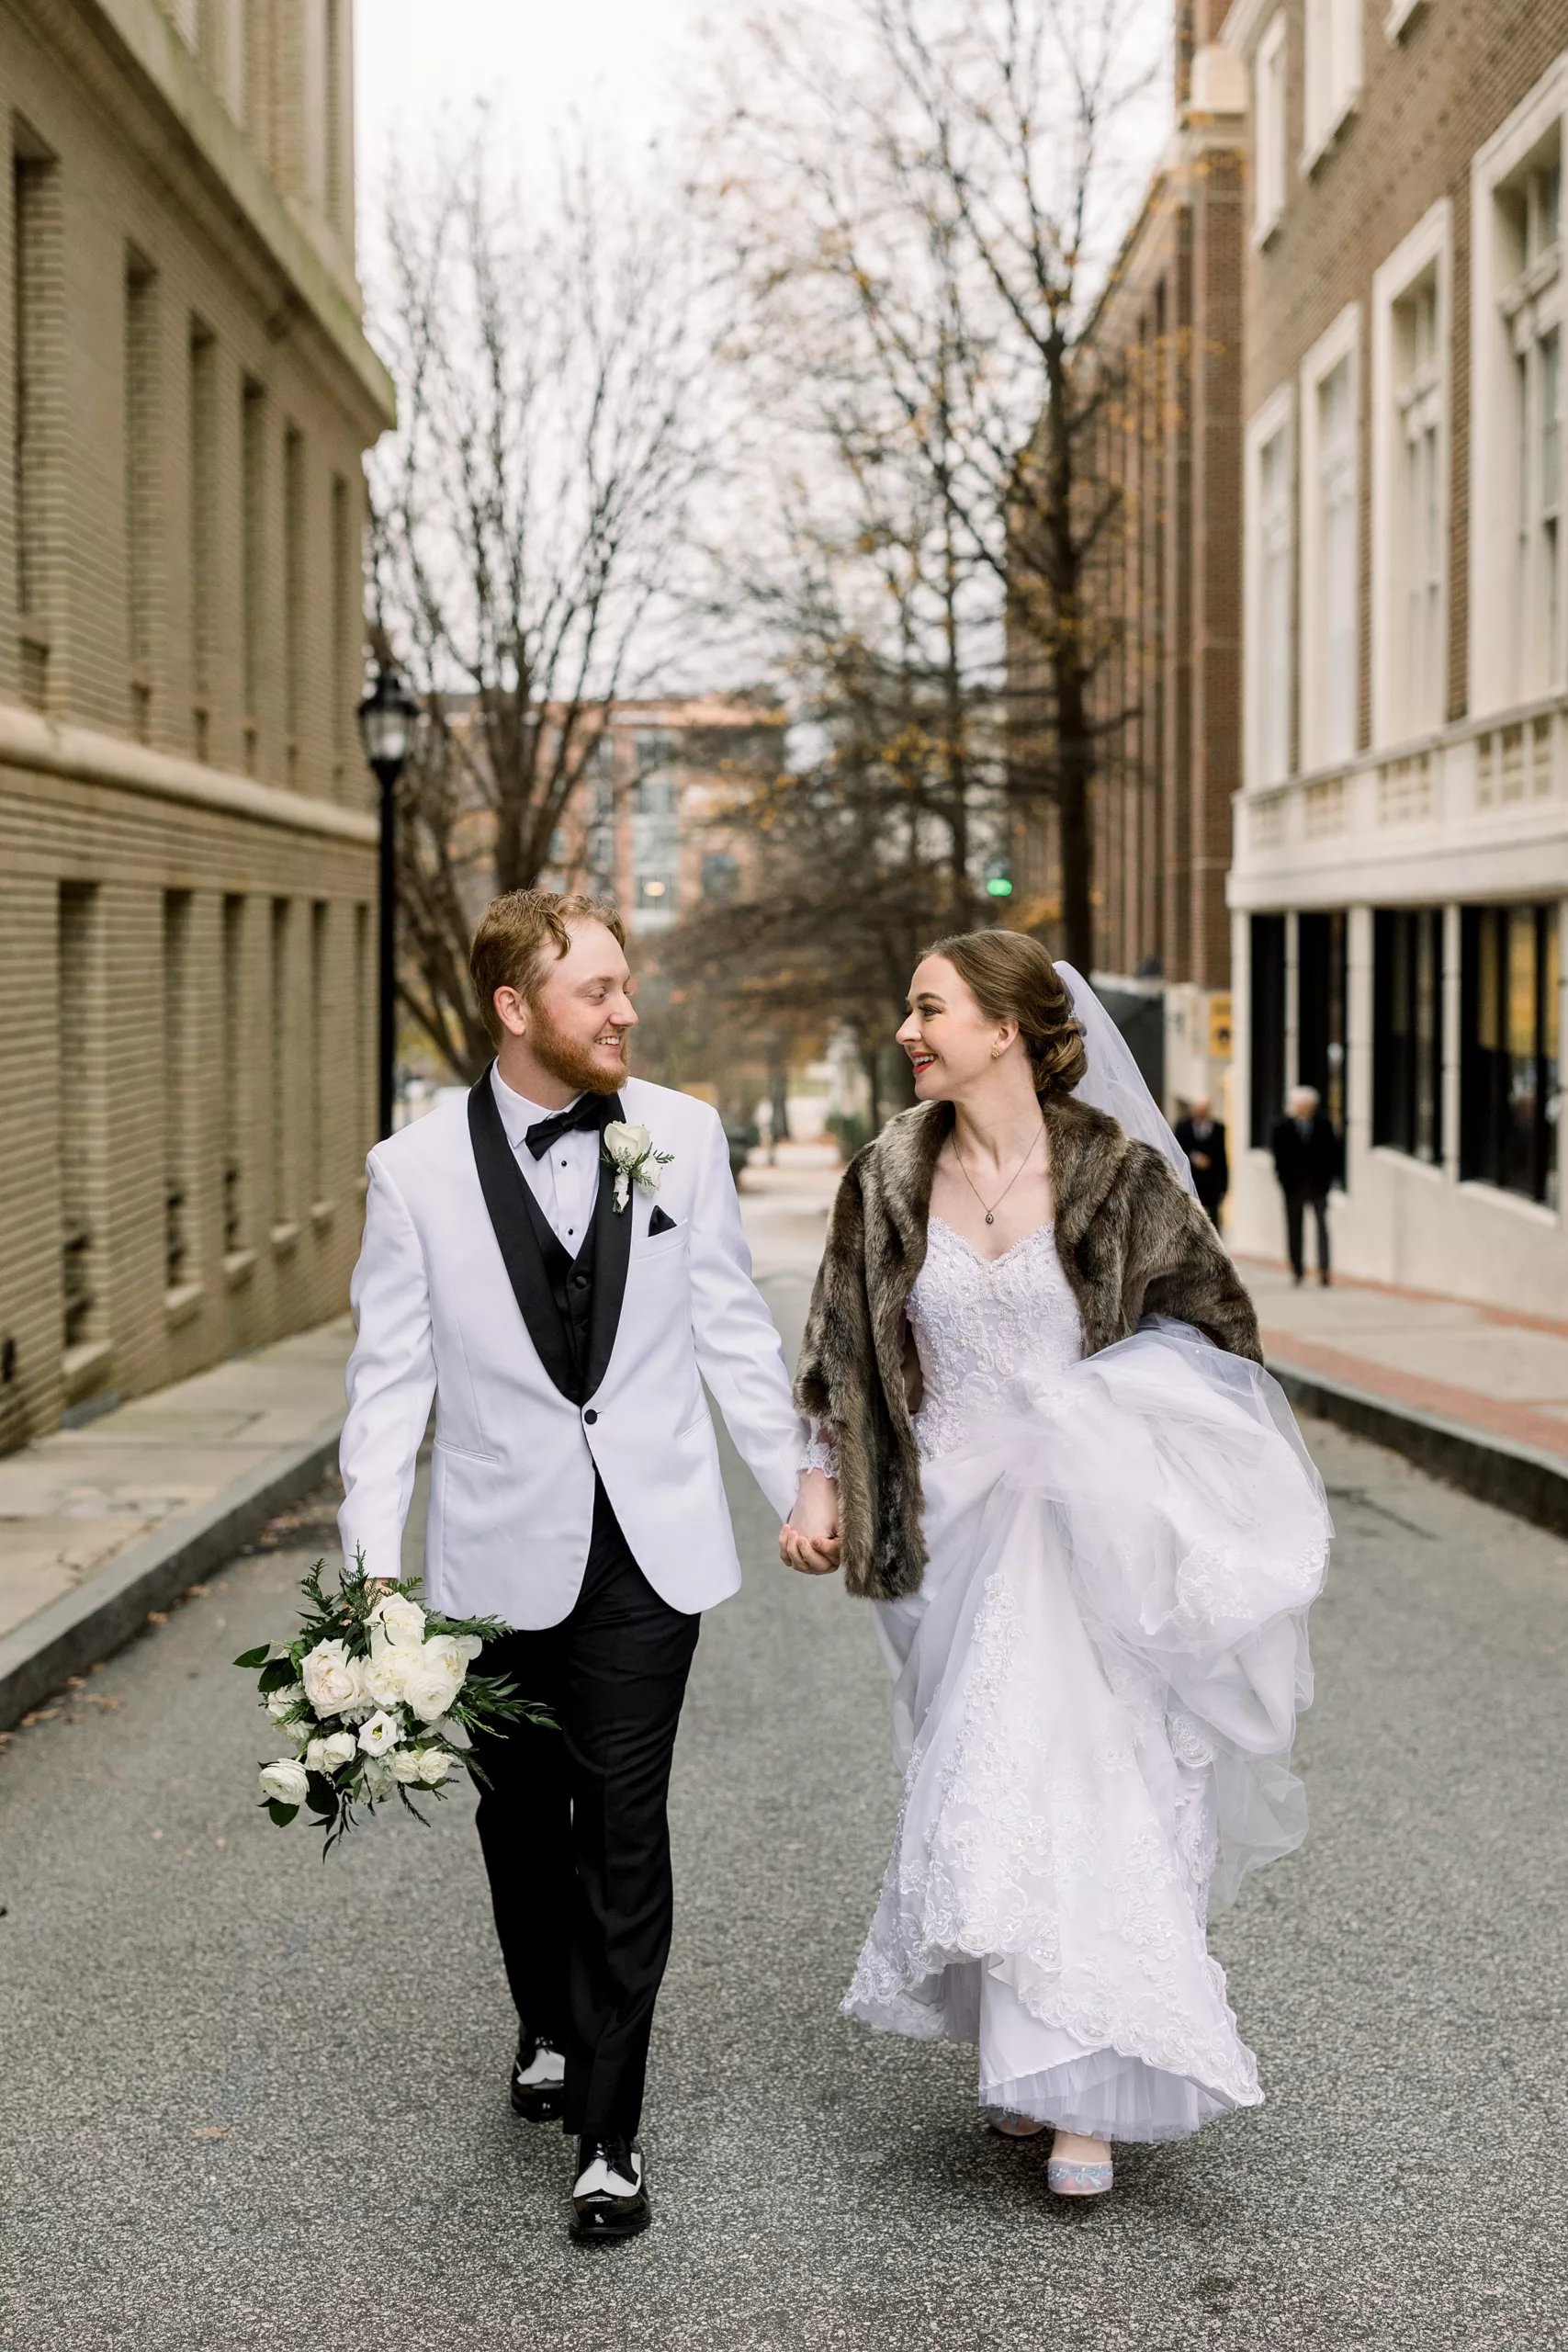 Newlyweds walk down a side street between buildings holding hands while wearing a white suit jacket and fur coat wedding planner vs coordinator